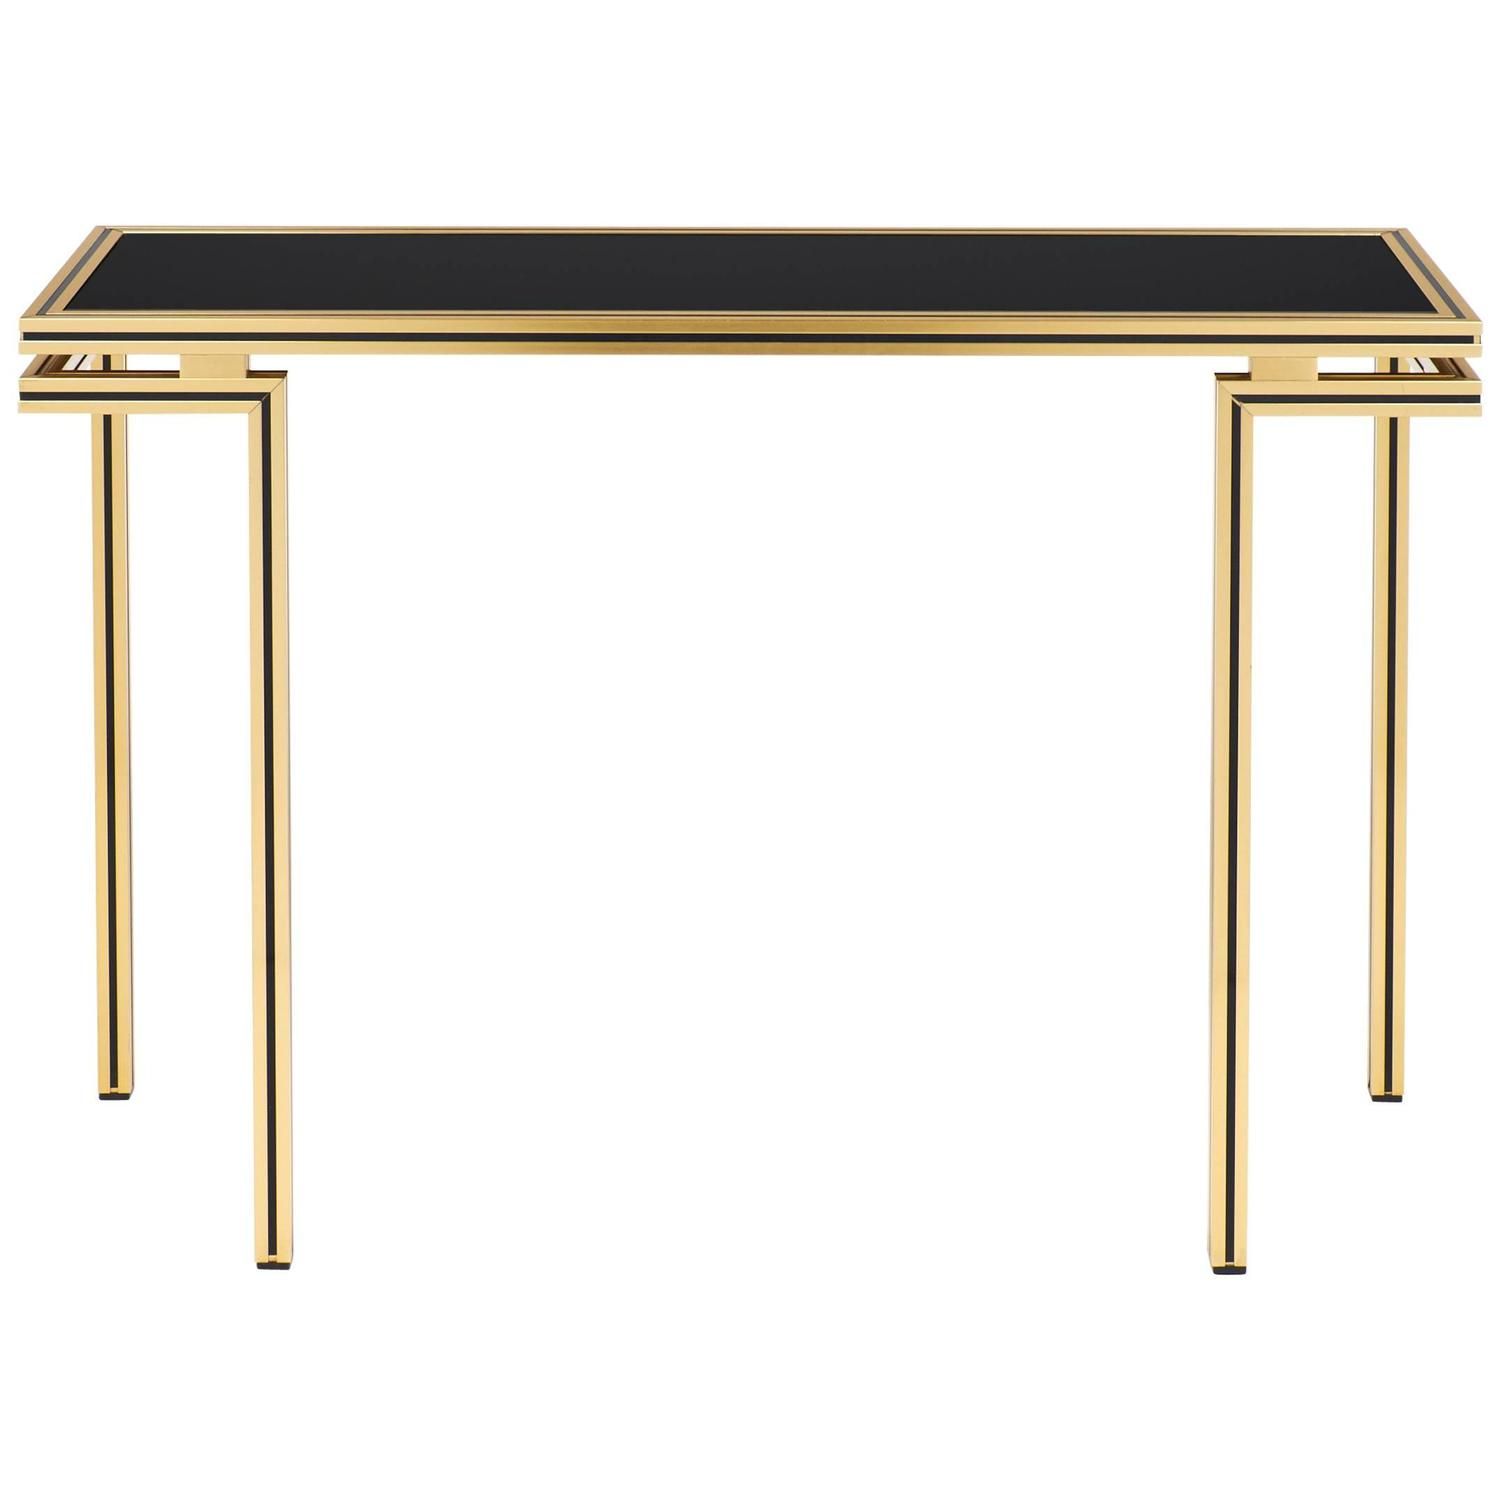 Vintage Black Glass Top Brass Console Tablepierre For Black Round Glass Top Console Tables (View 8 of 20)